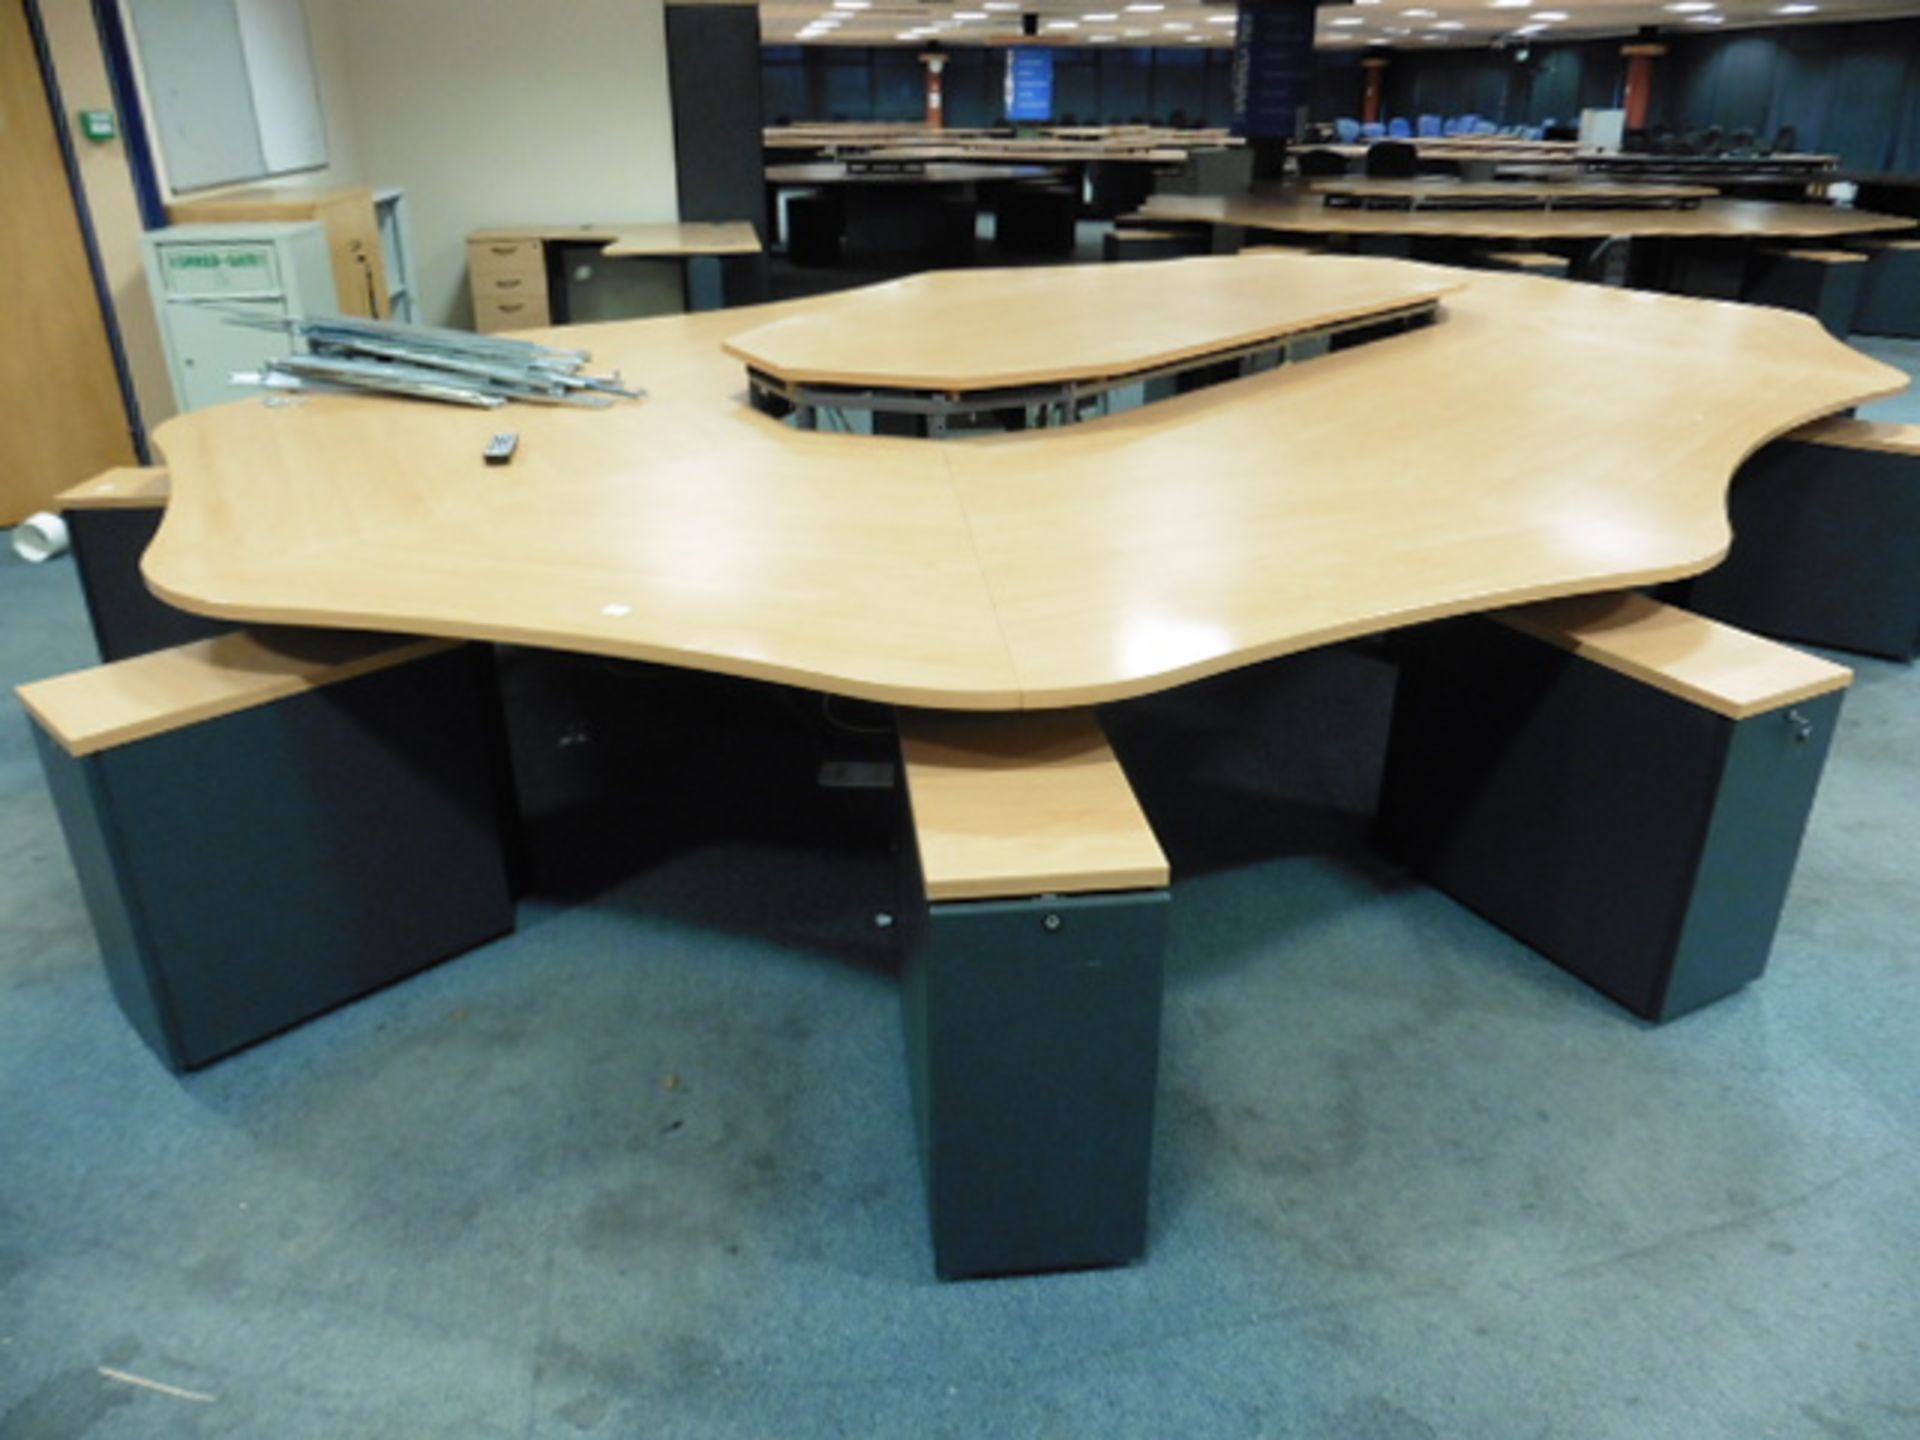 Call centre 8 station modular desk pod finished in beech and grey, comes with 5 free standing - Image 2 of 3